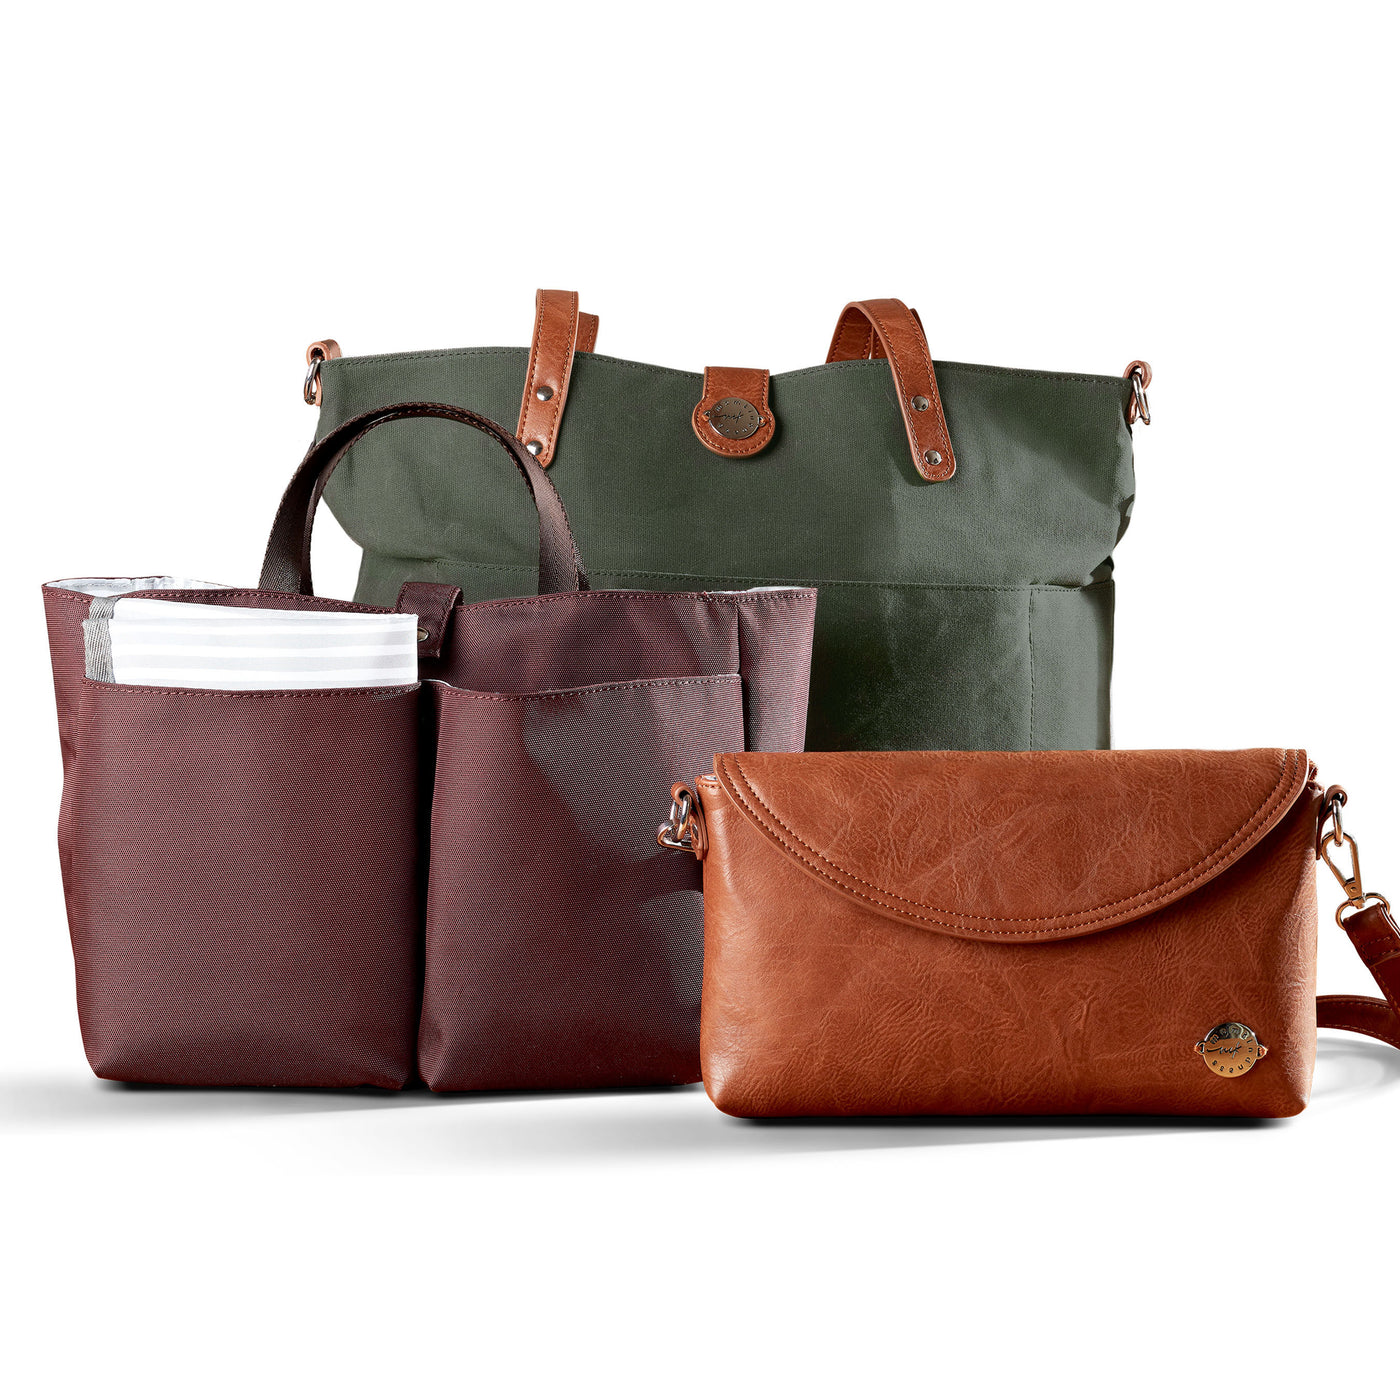 Forest Green Tote Trio shown with three included components; forest green waxed canvas tote with brown vegan leather accents, brown vegan leather diaper clutch and burgundy multi-pocket organizer insert with carry handles.